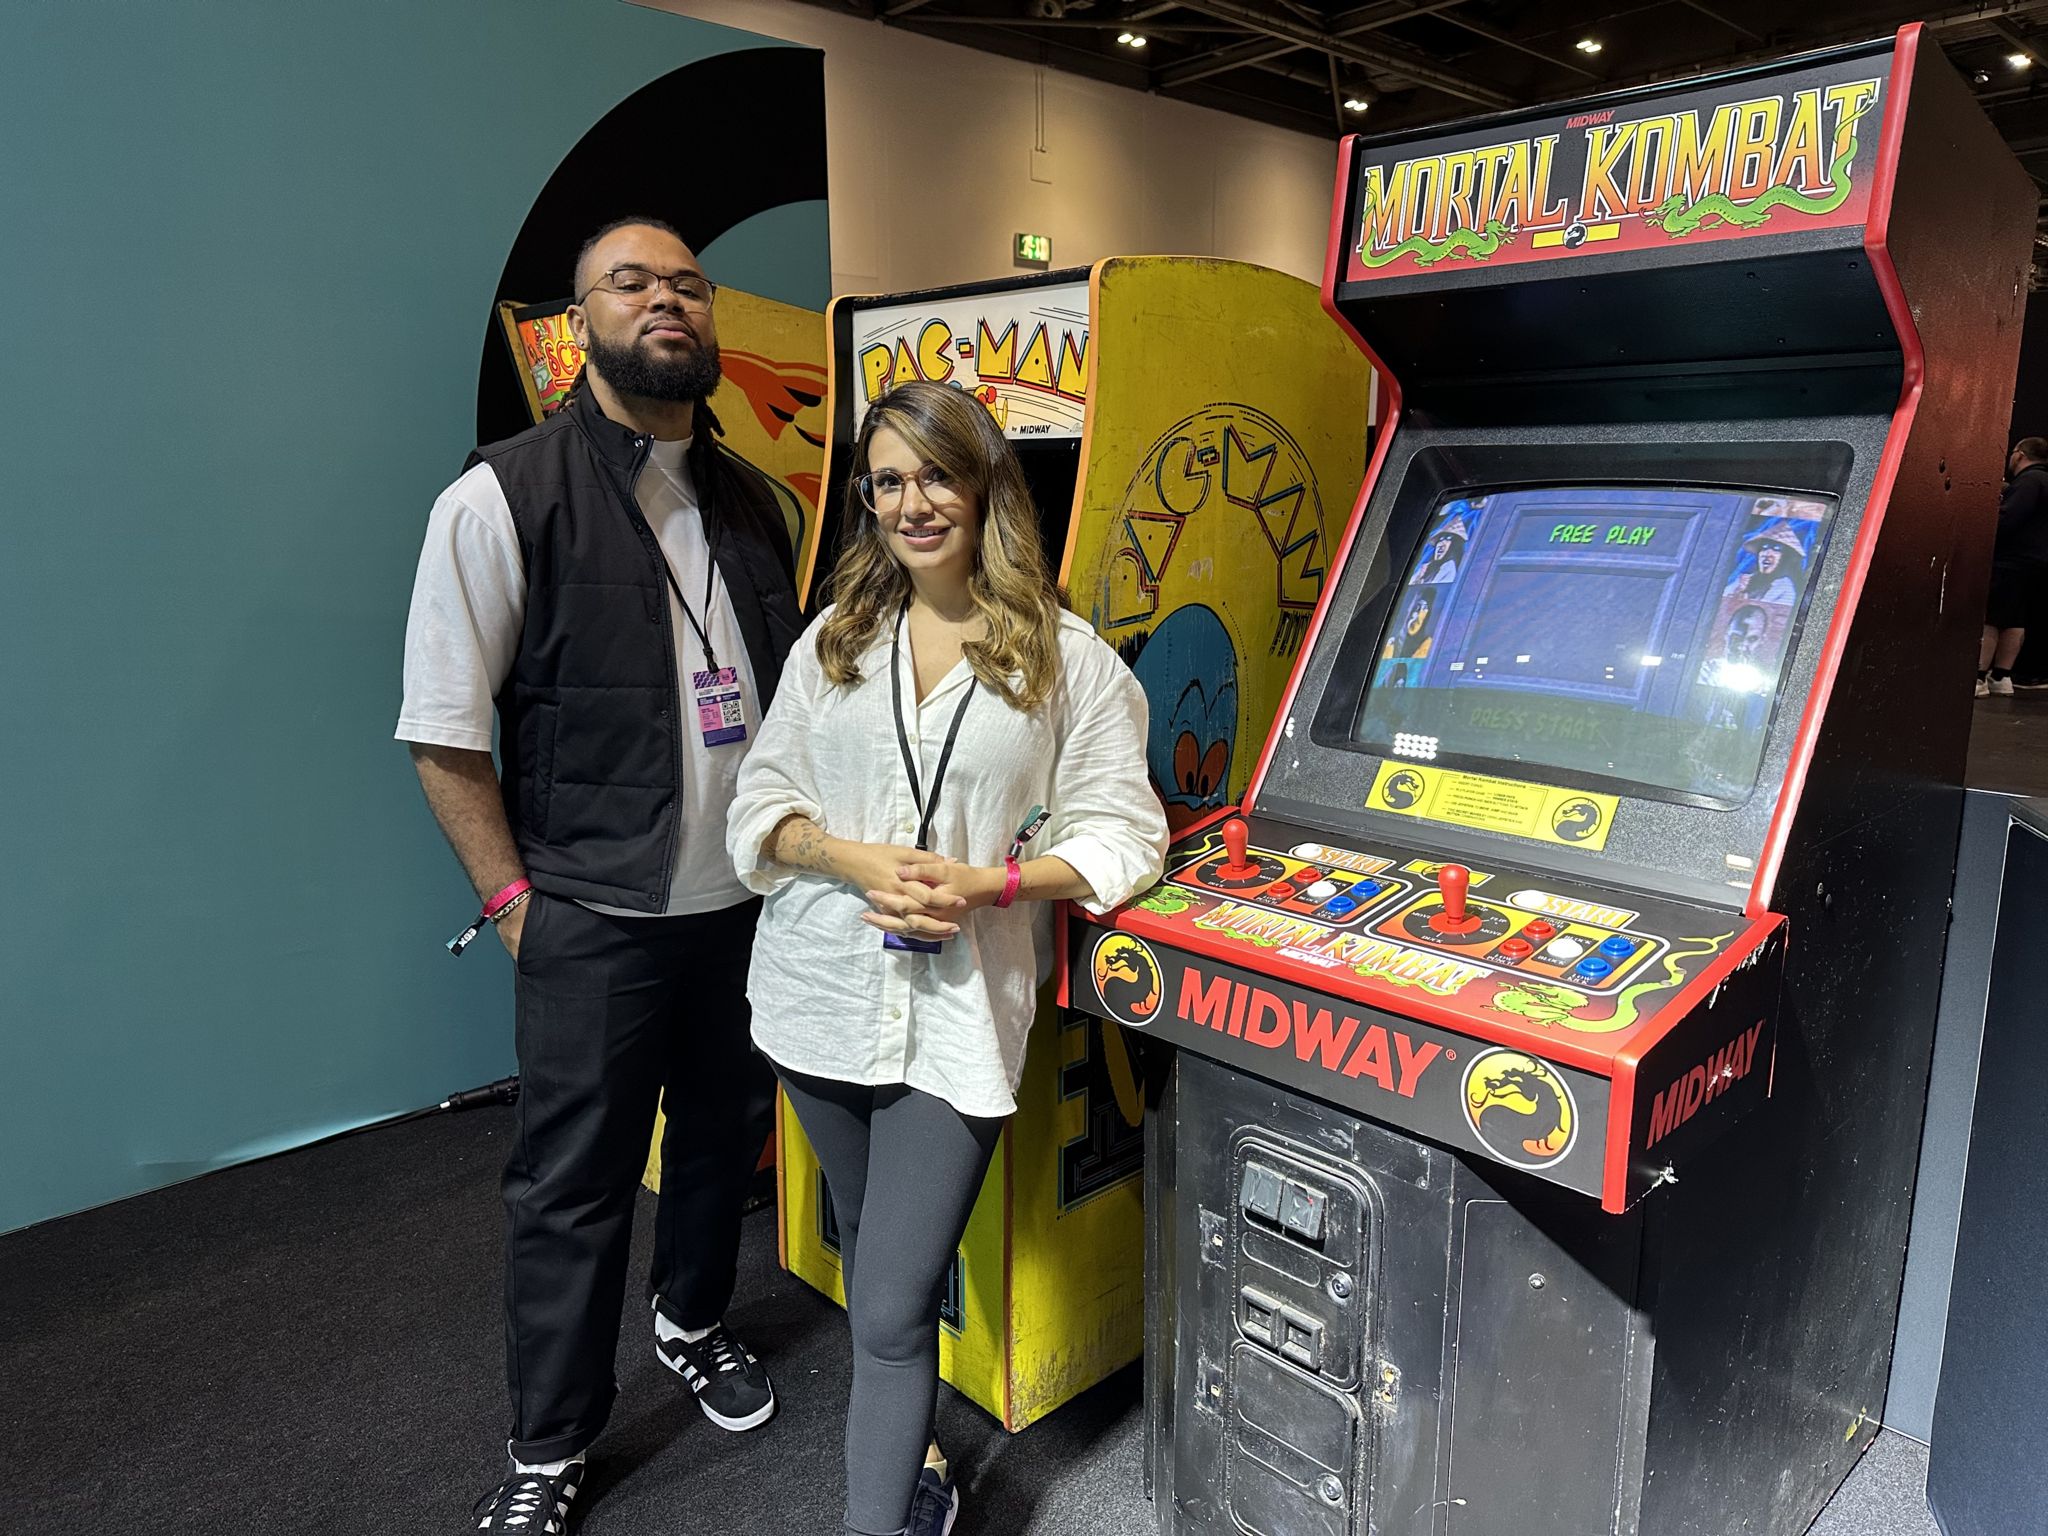 A man in a gillet and a woman in a white shirt stand in front of arcade machines